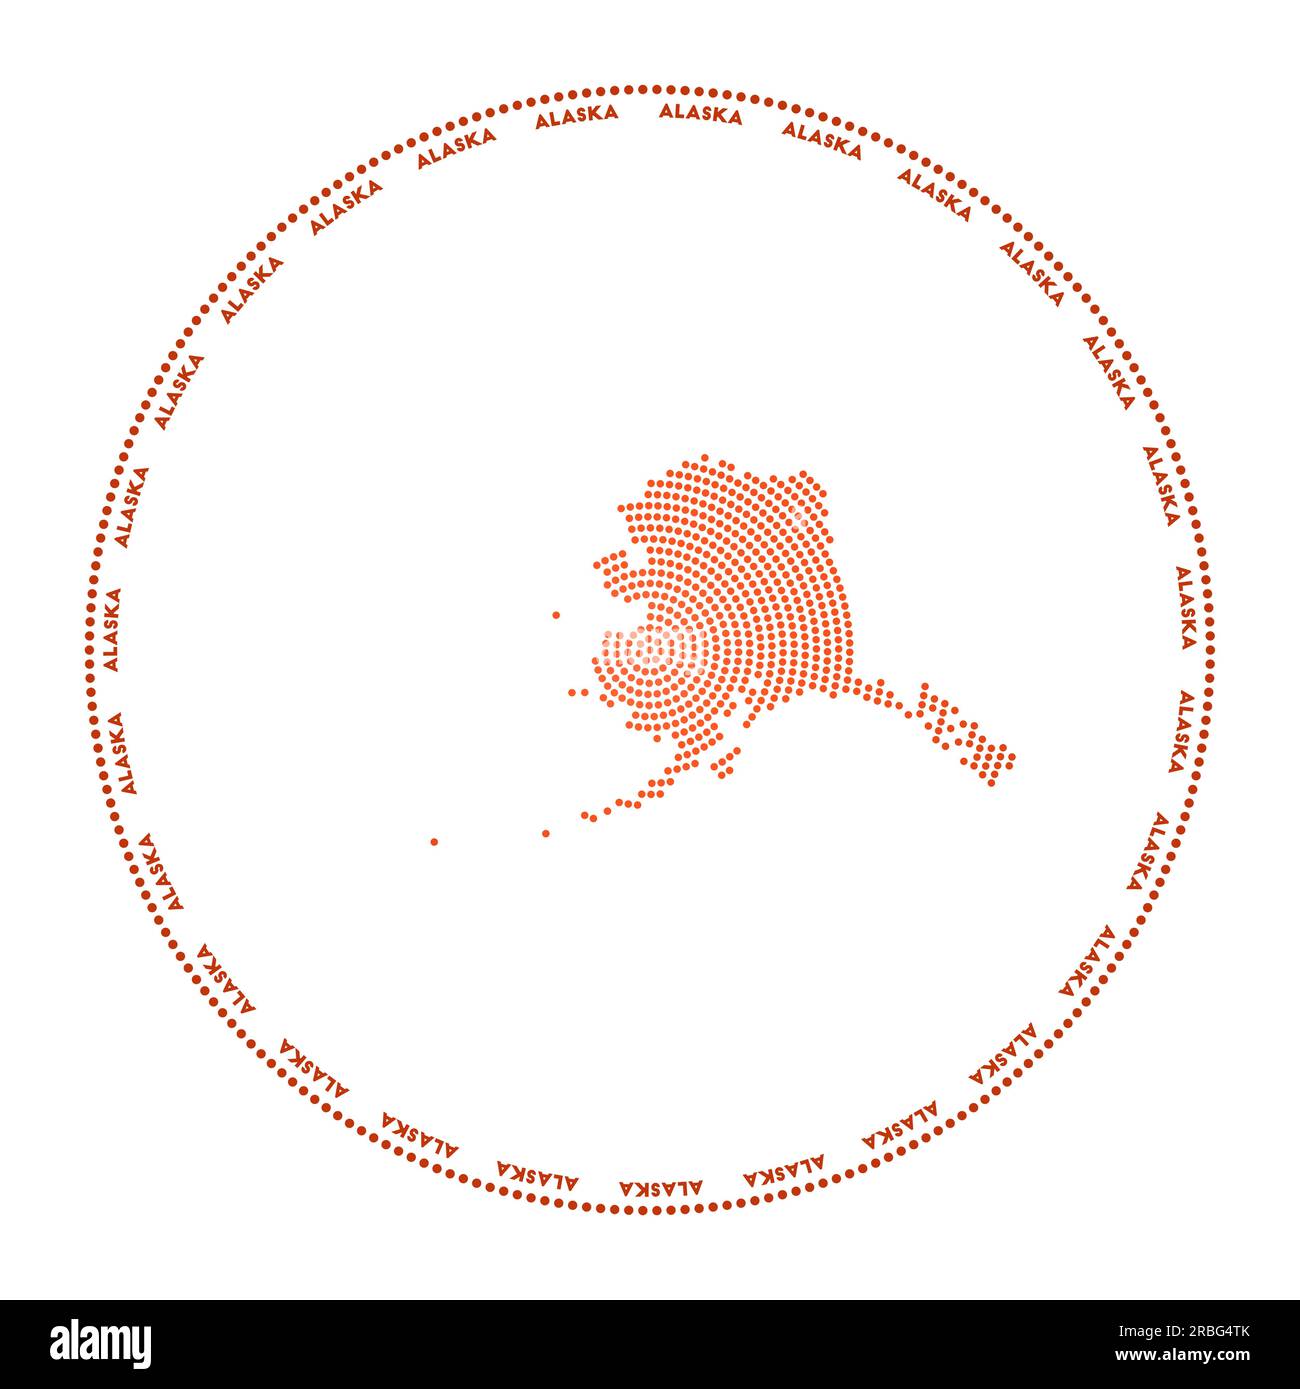 Alaska round logo. Digital style shape of Alaska in dotted circle with us state name. Tech icon of the us state with gradiented dots. Vibrant vector i Stock Vector